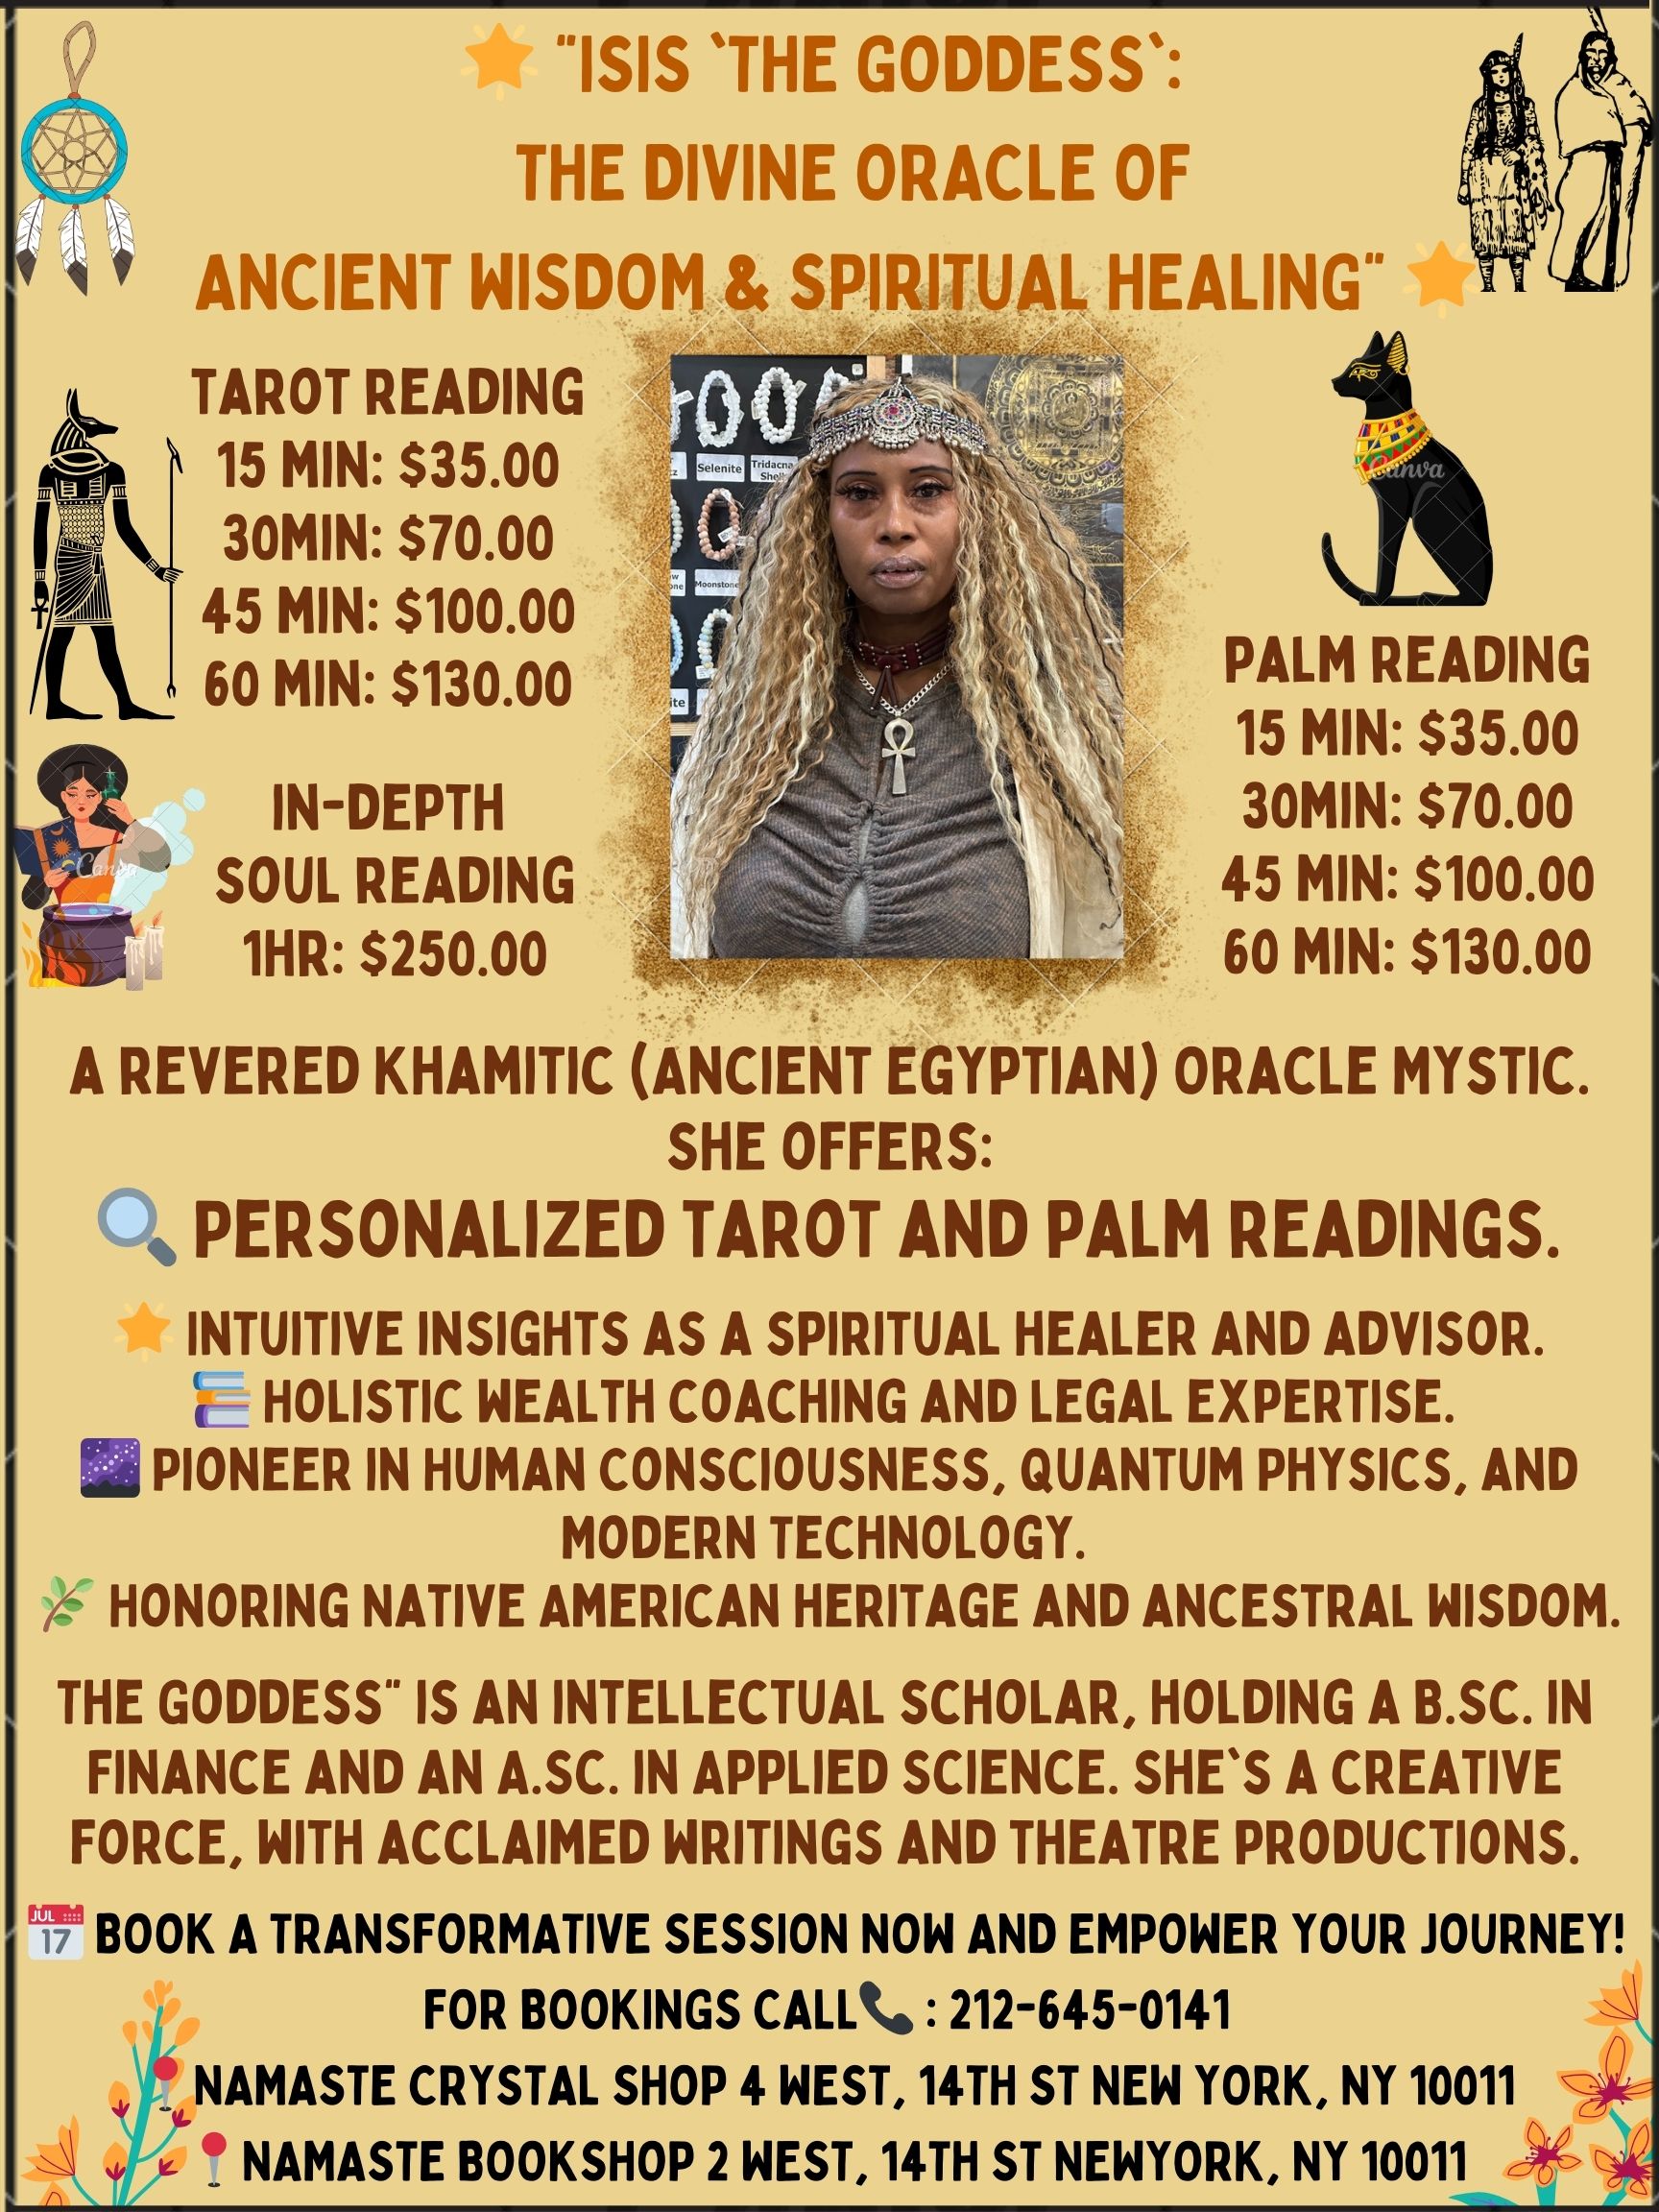 the-goddess-a-revered-khamitic-ancient-egyptian-oracle-mystic.jpg